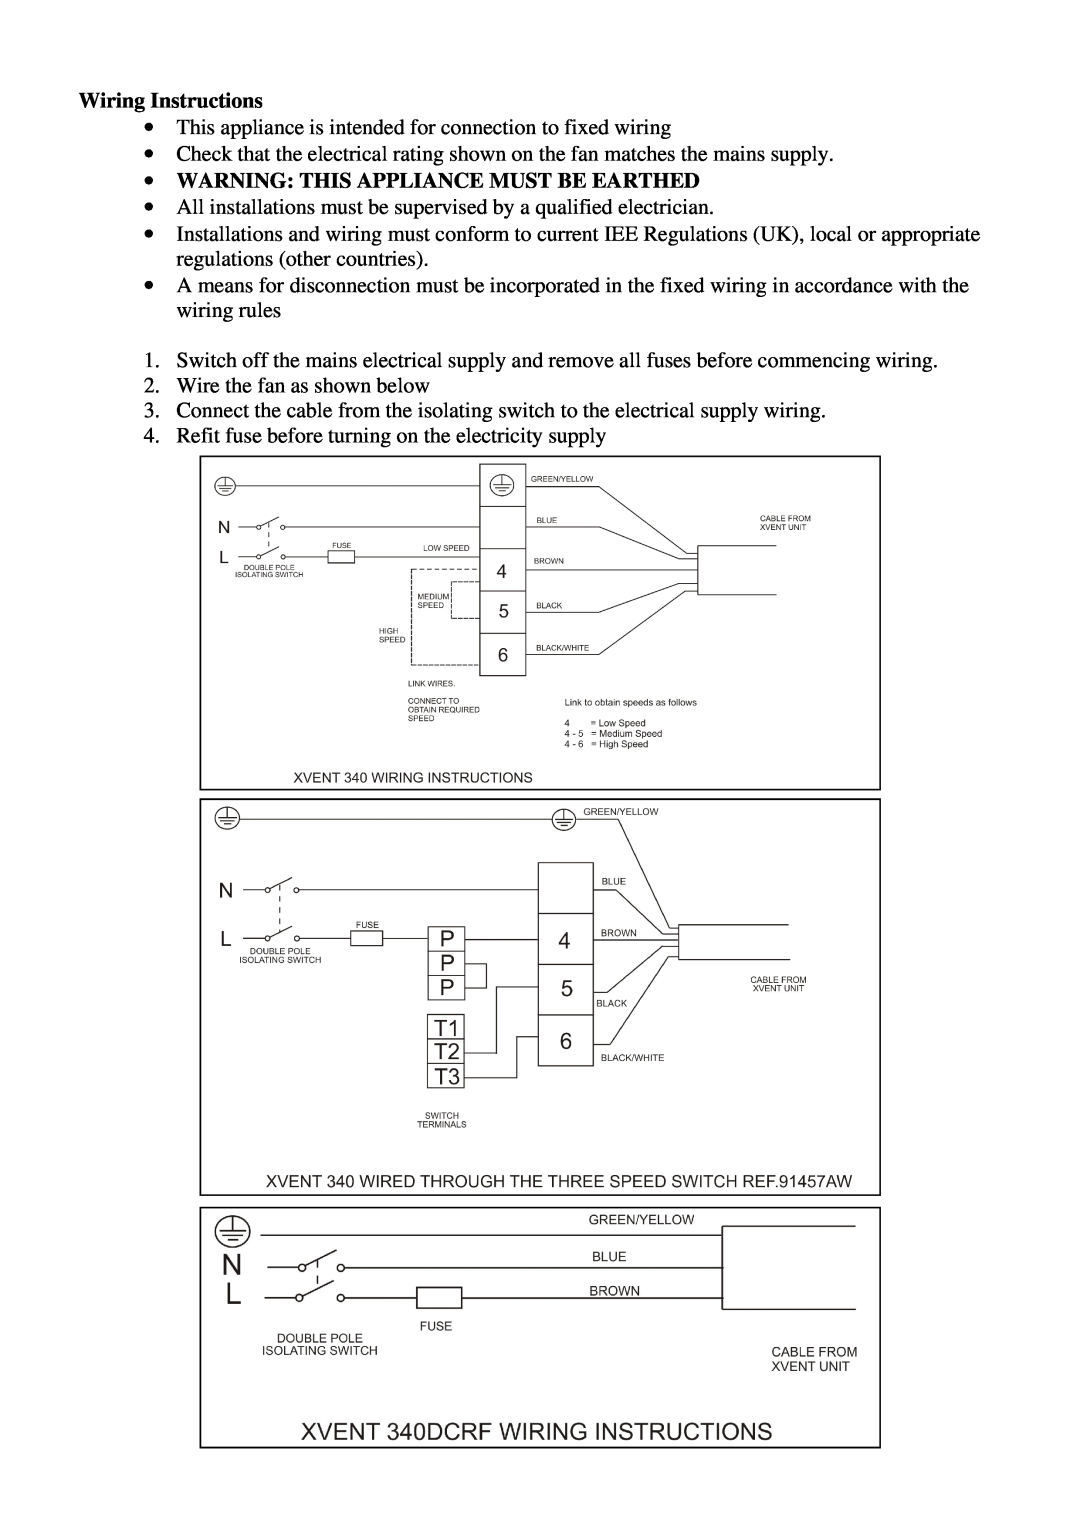 Xpelair 340 manual Wiring Instructions, ∙ Warning This Appliance Must Be Earthed 